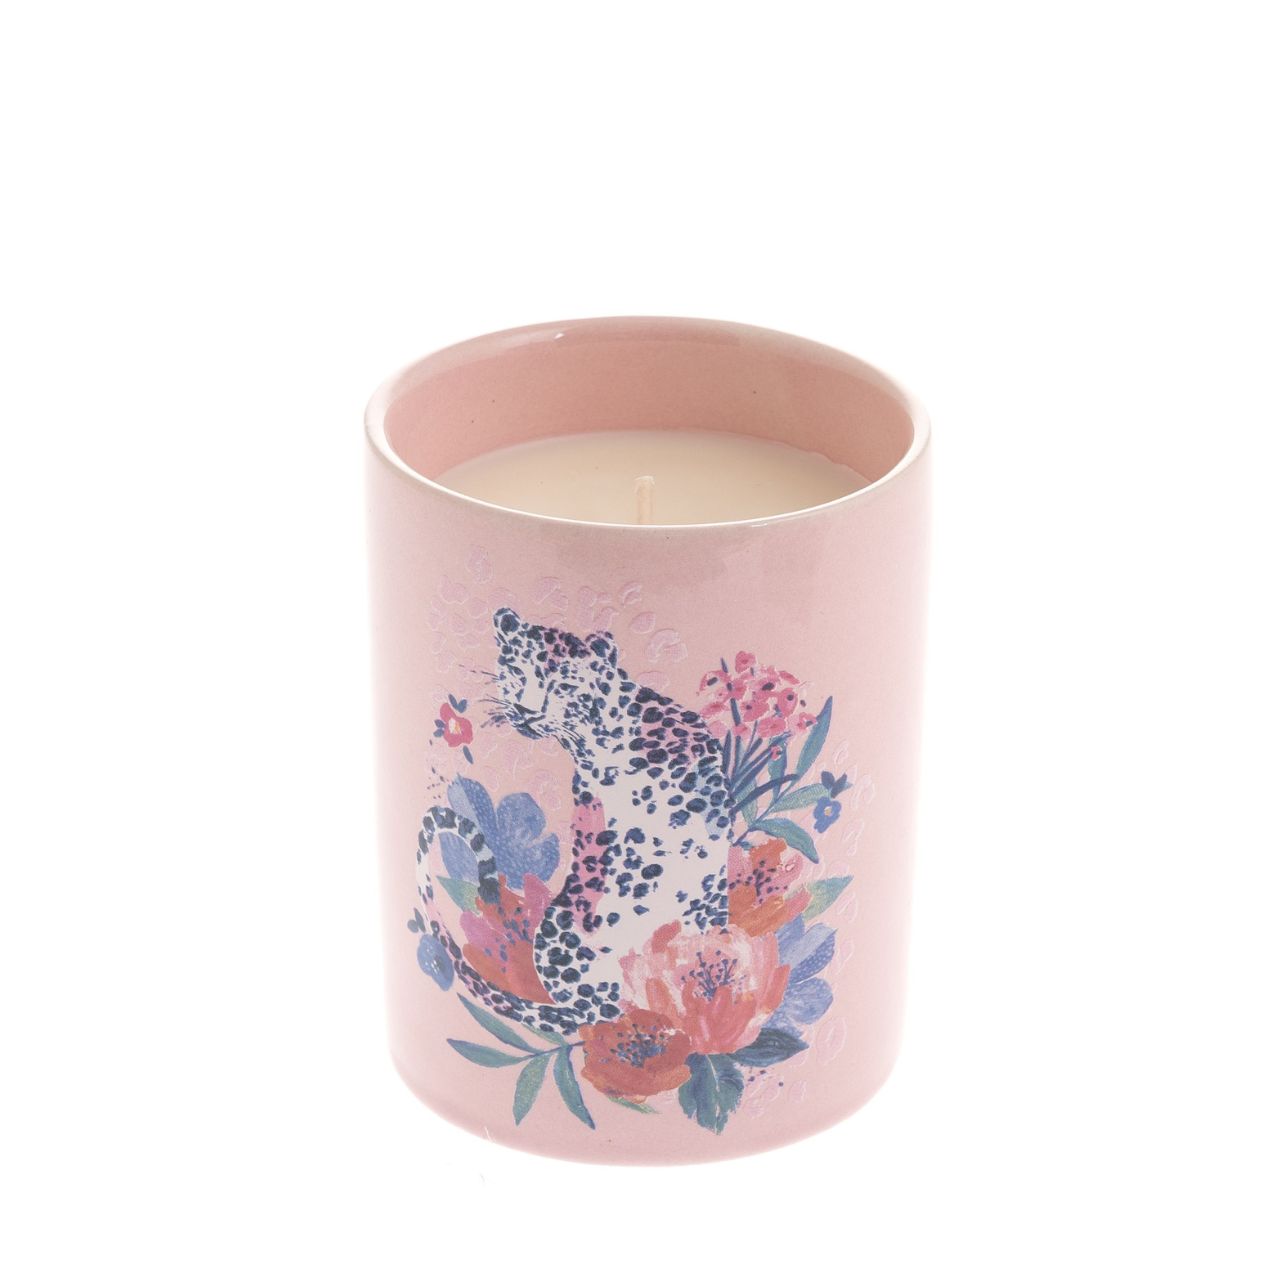 Candle Passionfruit & Lotus Blossom by Frida Big Cat 270g  This sweet-scented passionfruit and lotus blossom candle is the perfect gift for big cat lovers. Completed with a vibrant ceramic holder, this decorative item adds a fun feel to any home.